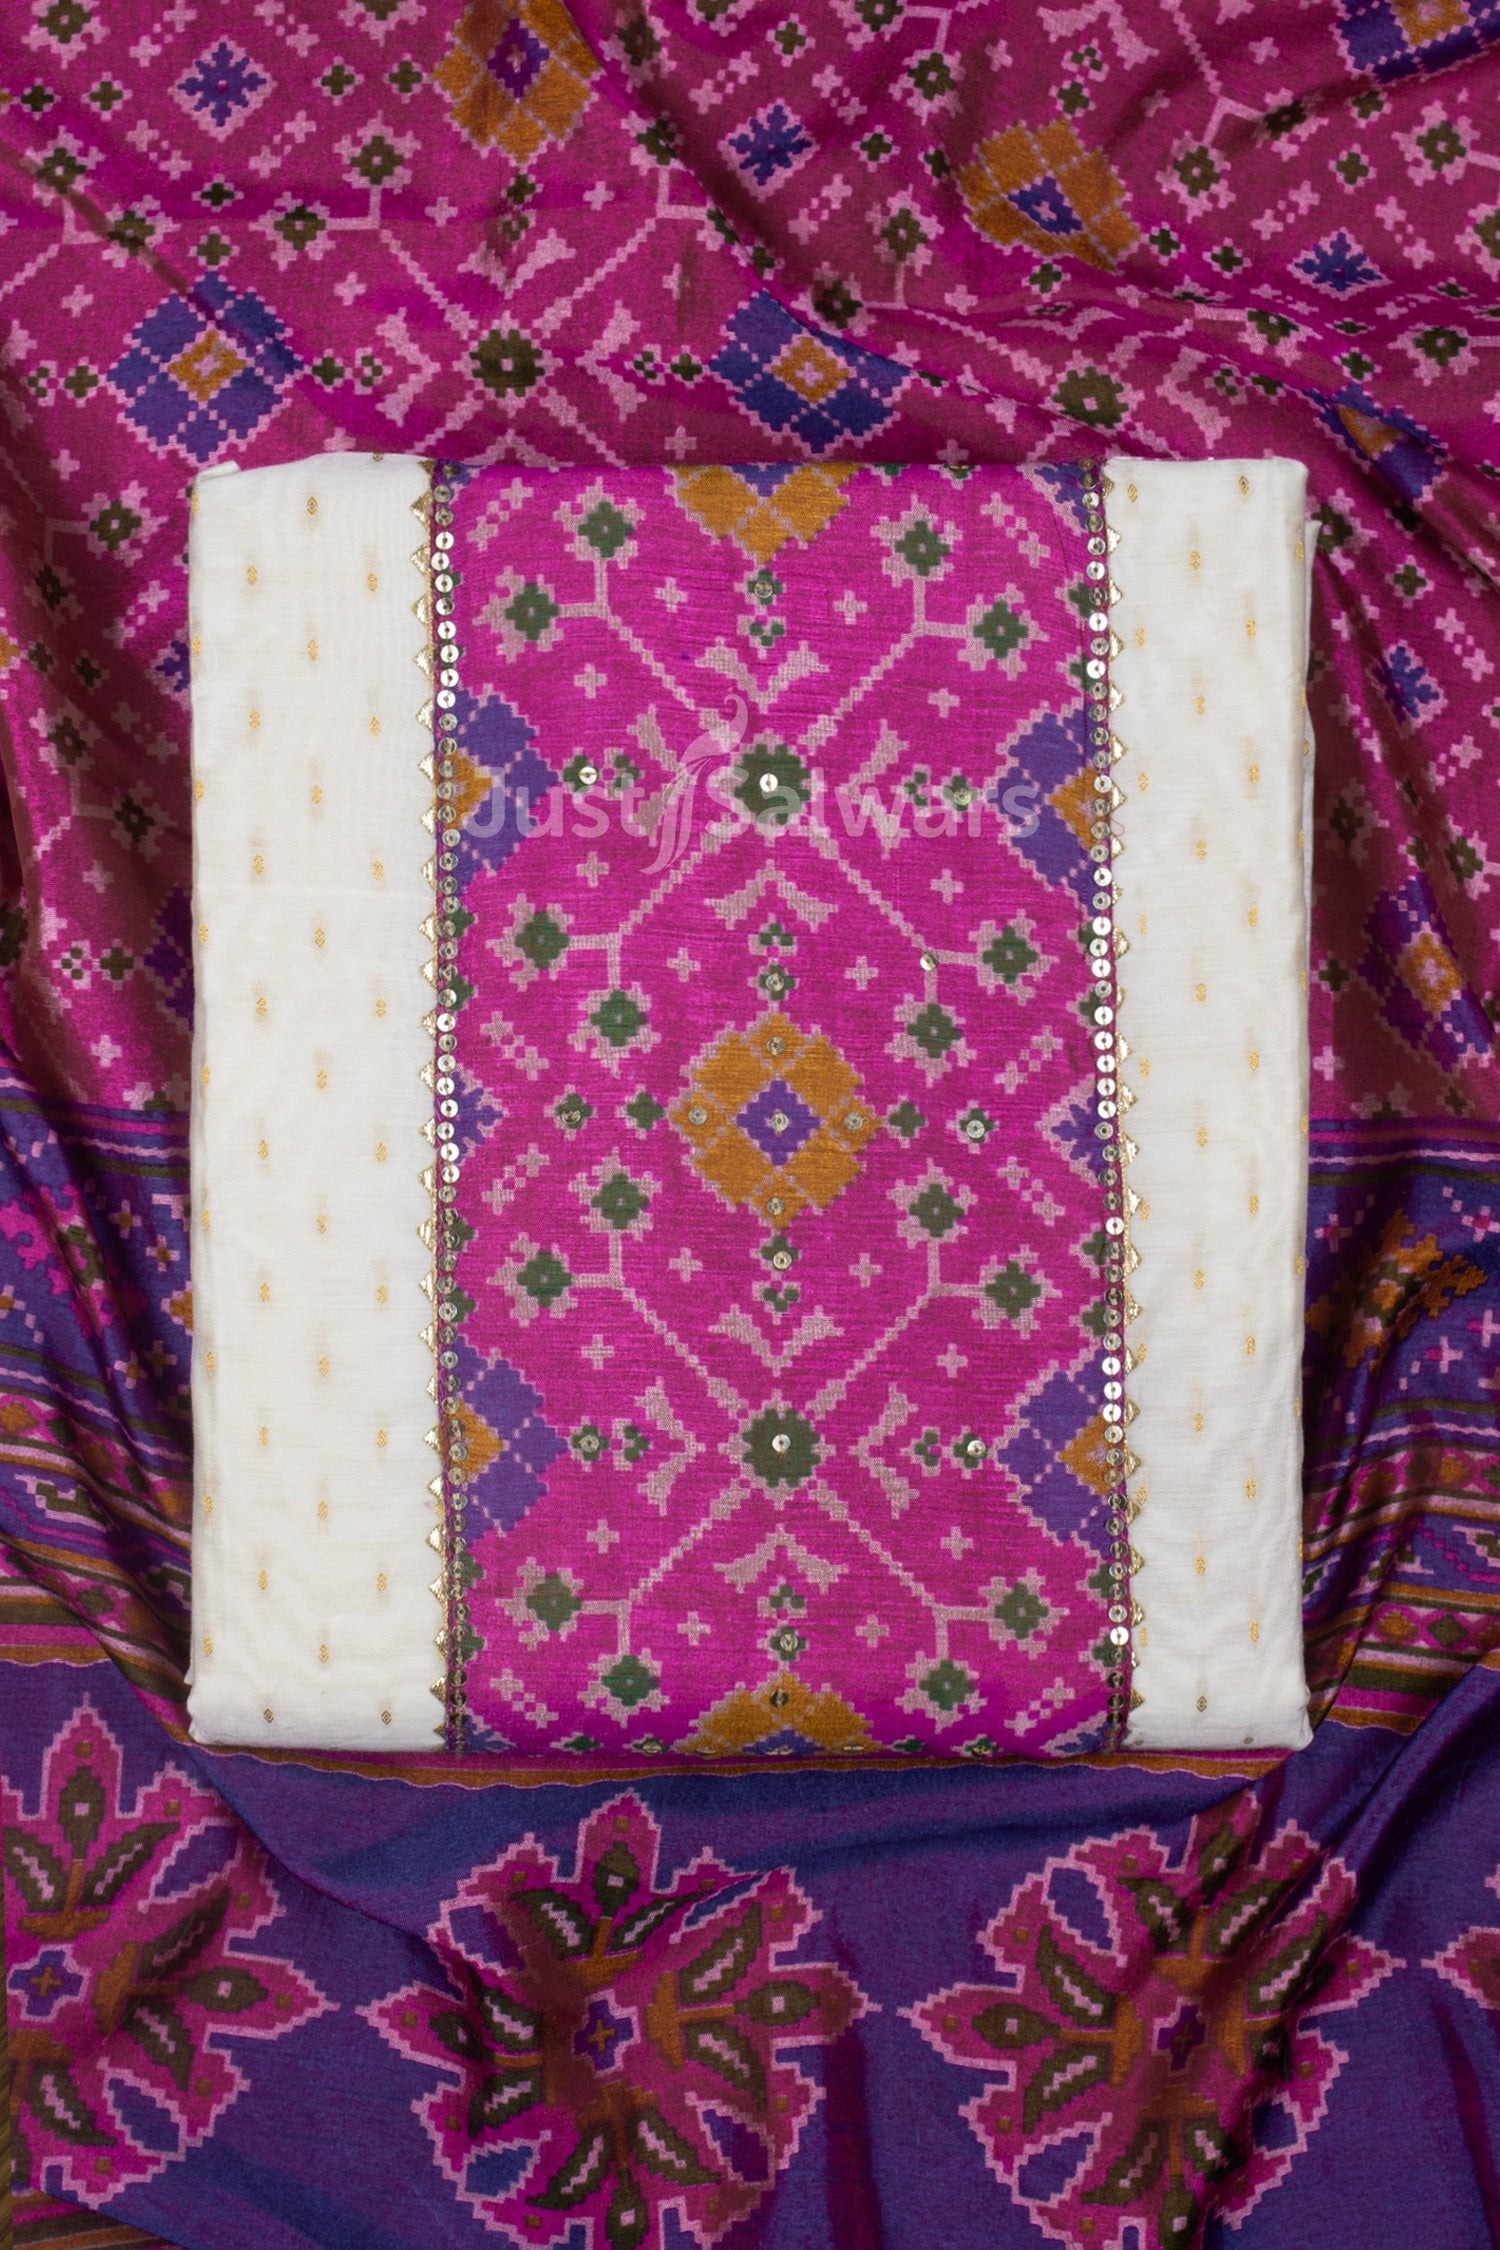 White and Pink Colour Silk Cotton Dress Material -Dress Material- Just Salwars